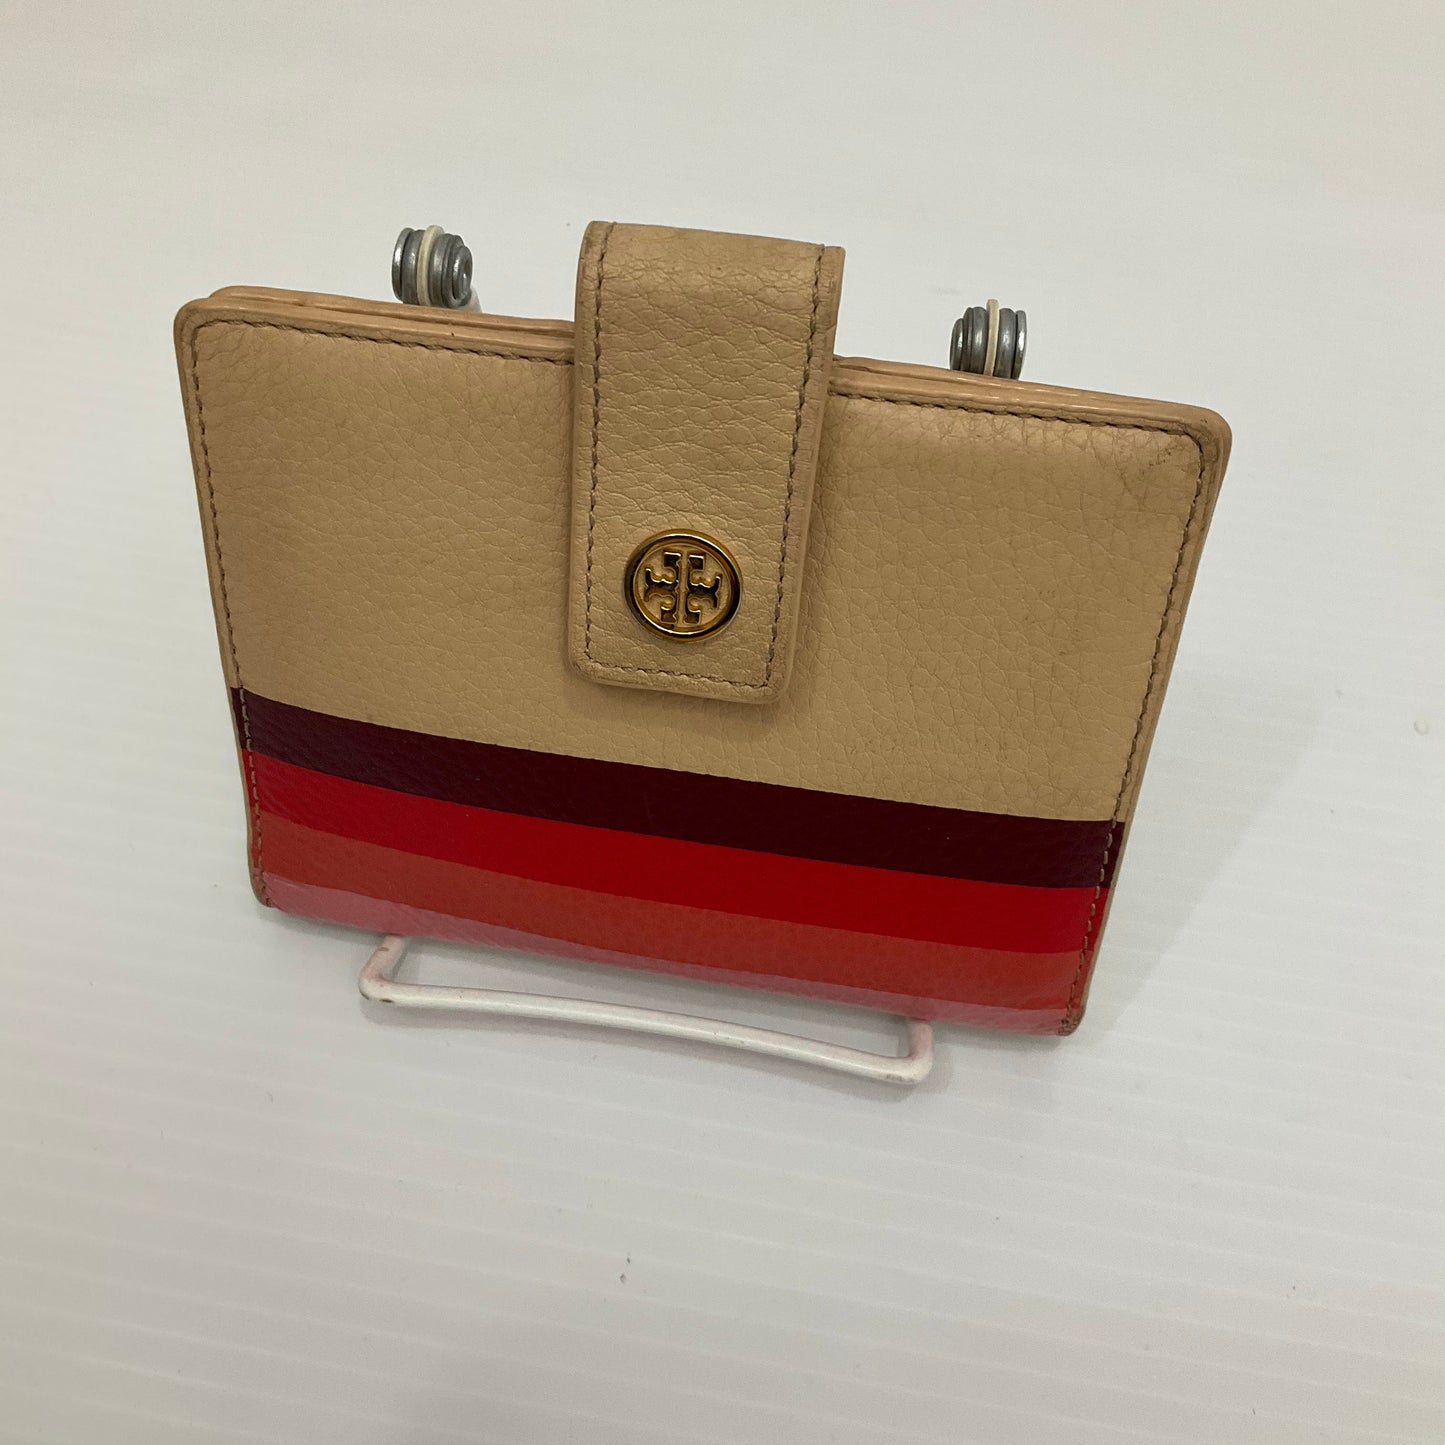 Wallet Designer By Tory Burch  Size: Small